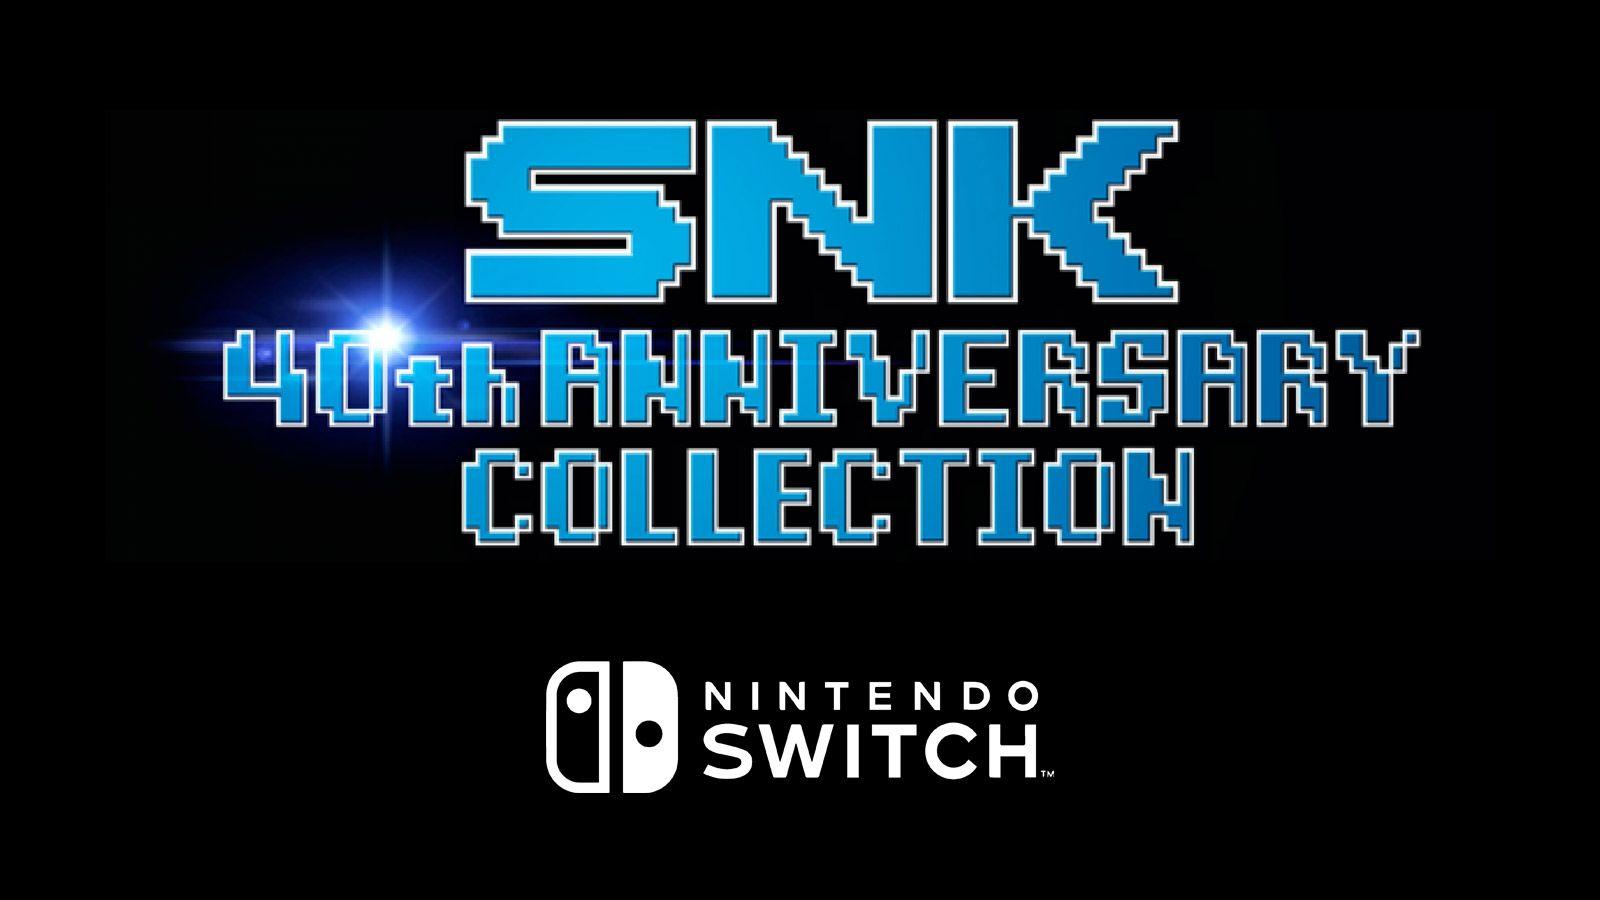 SNK 40th Anniversary Collection Announced for Switch